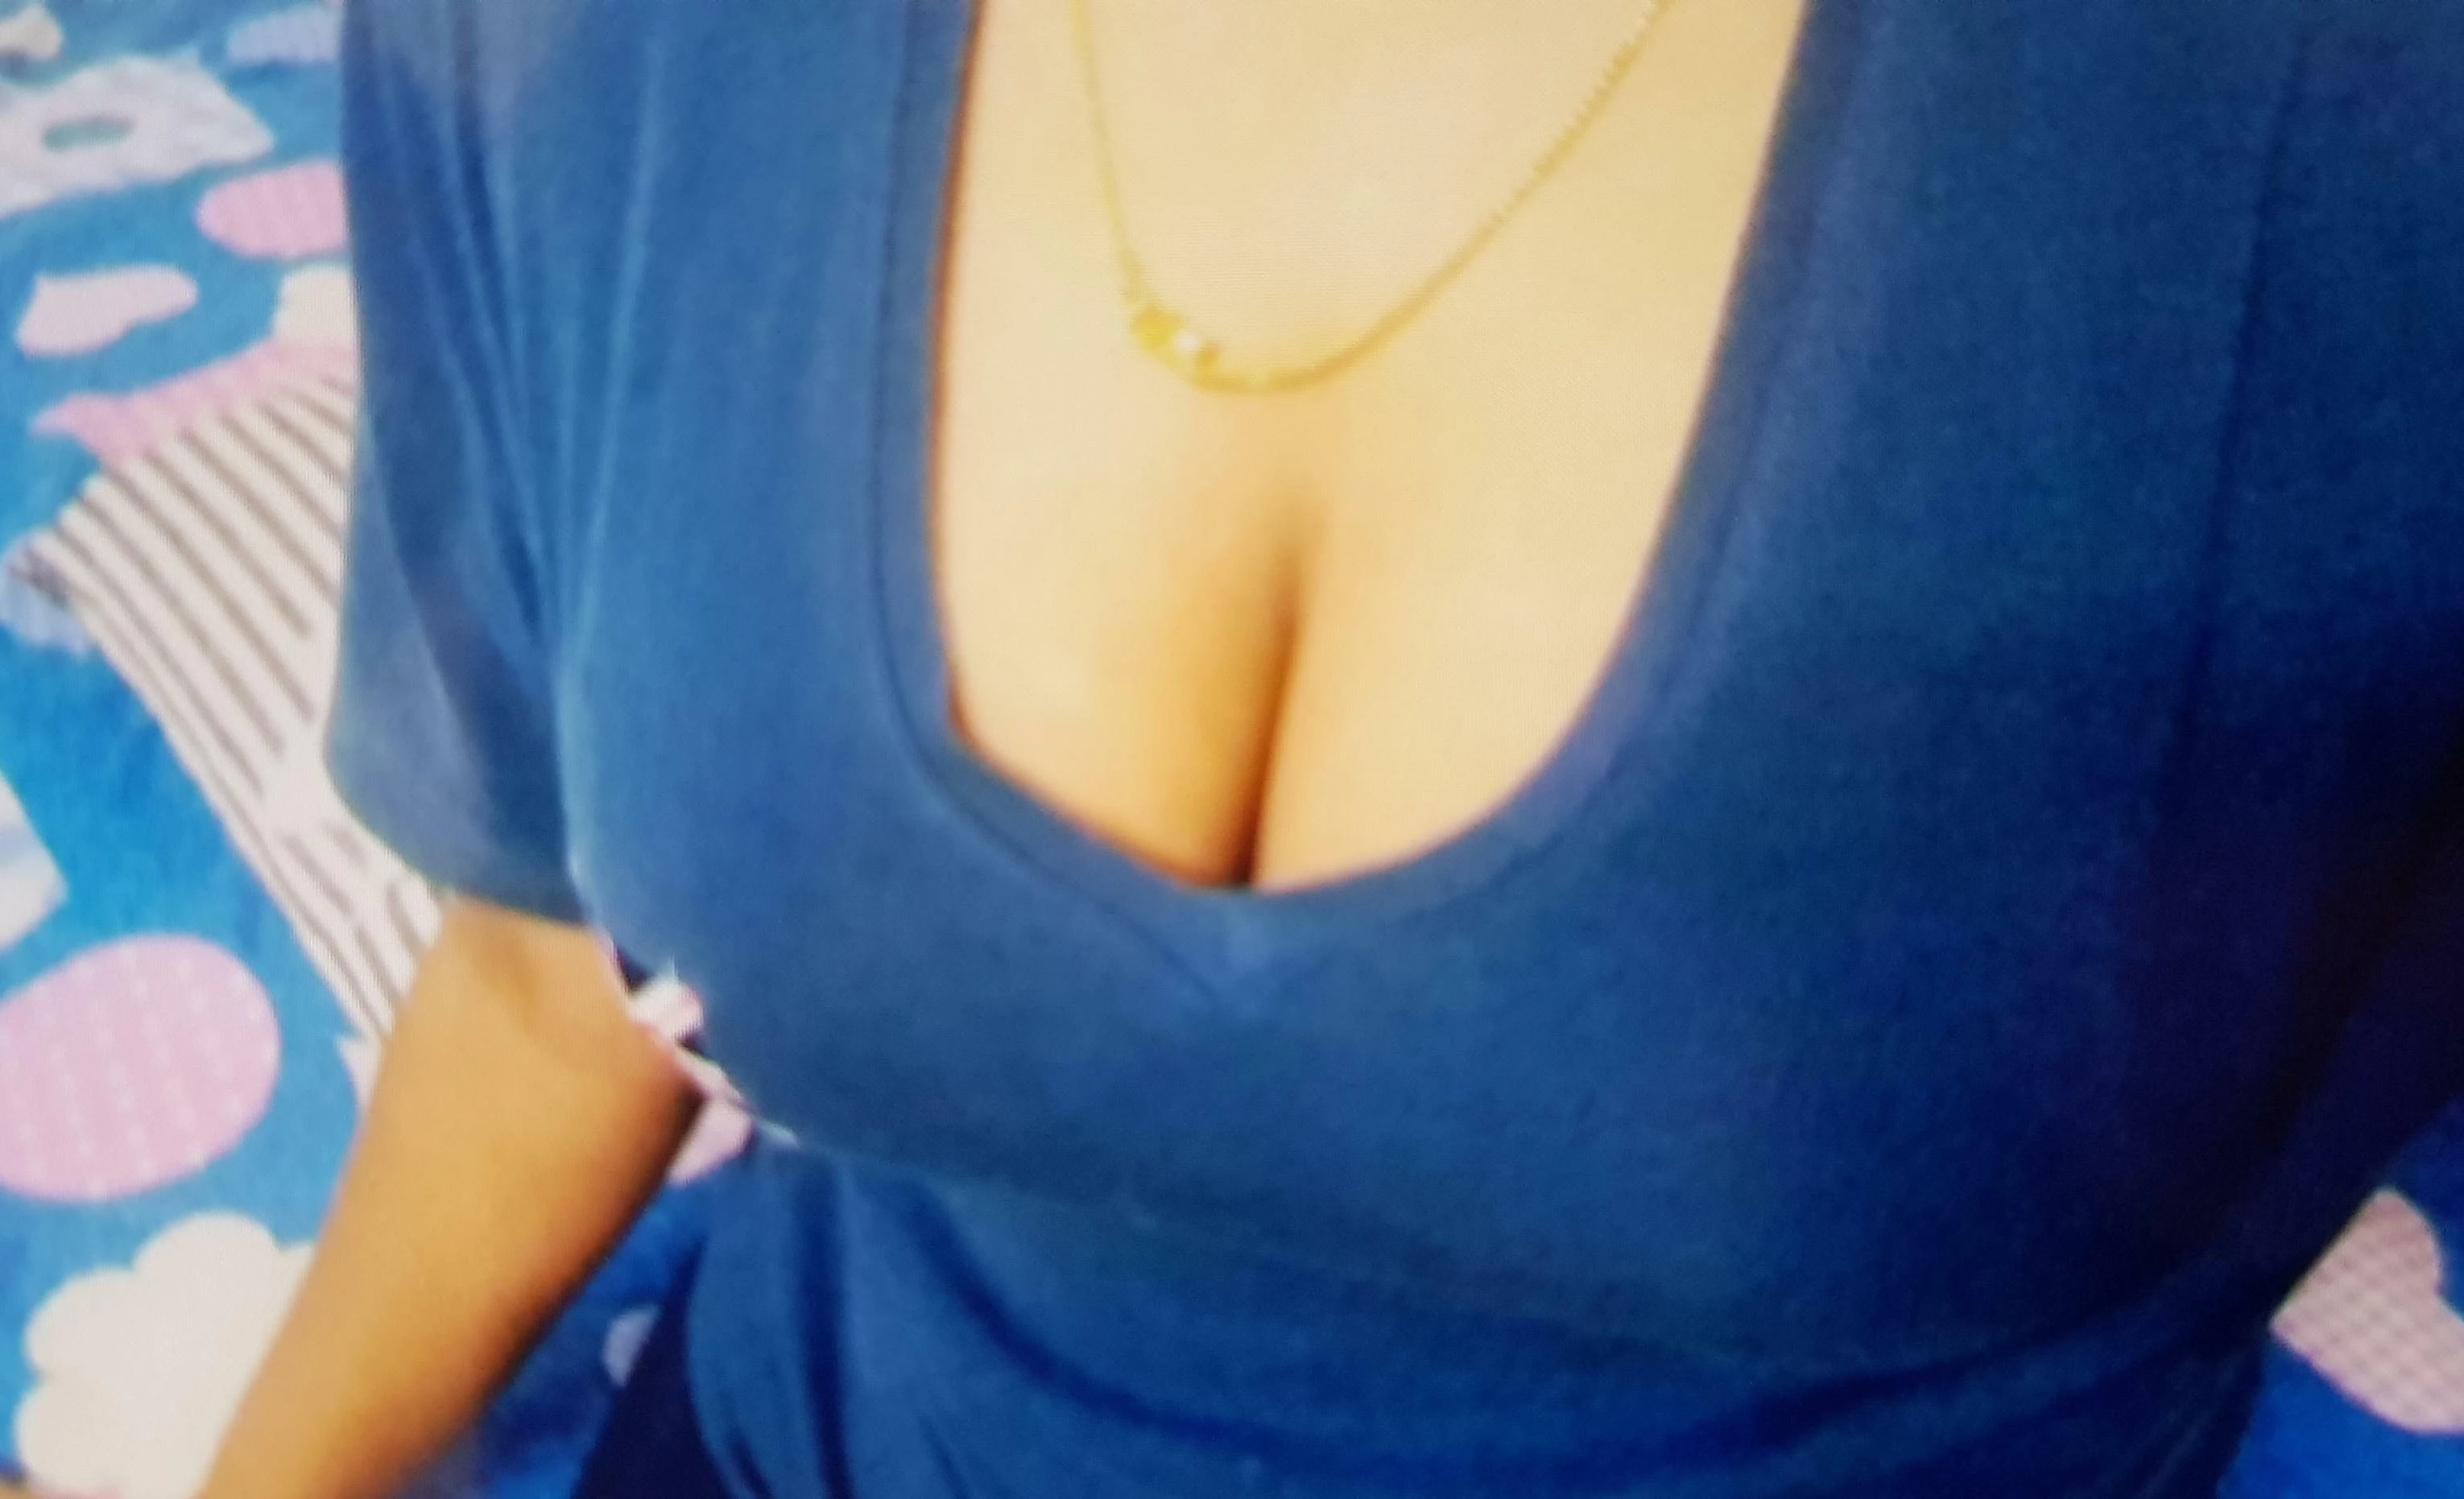 Is this deep cleavage enough to seduce my cousin? (f)